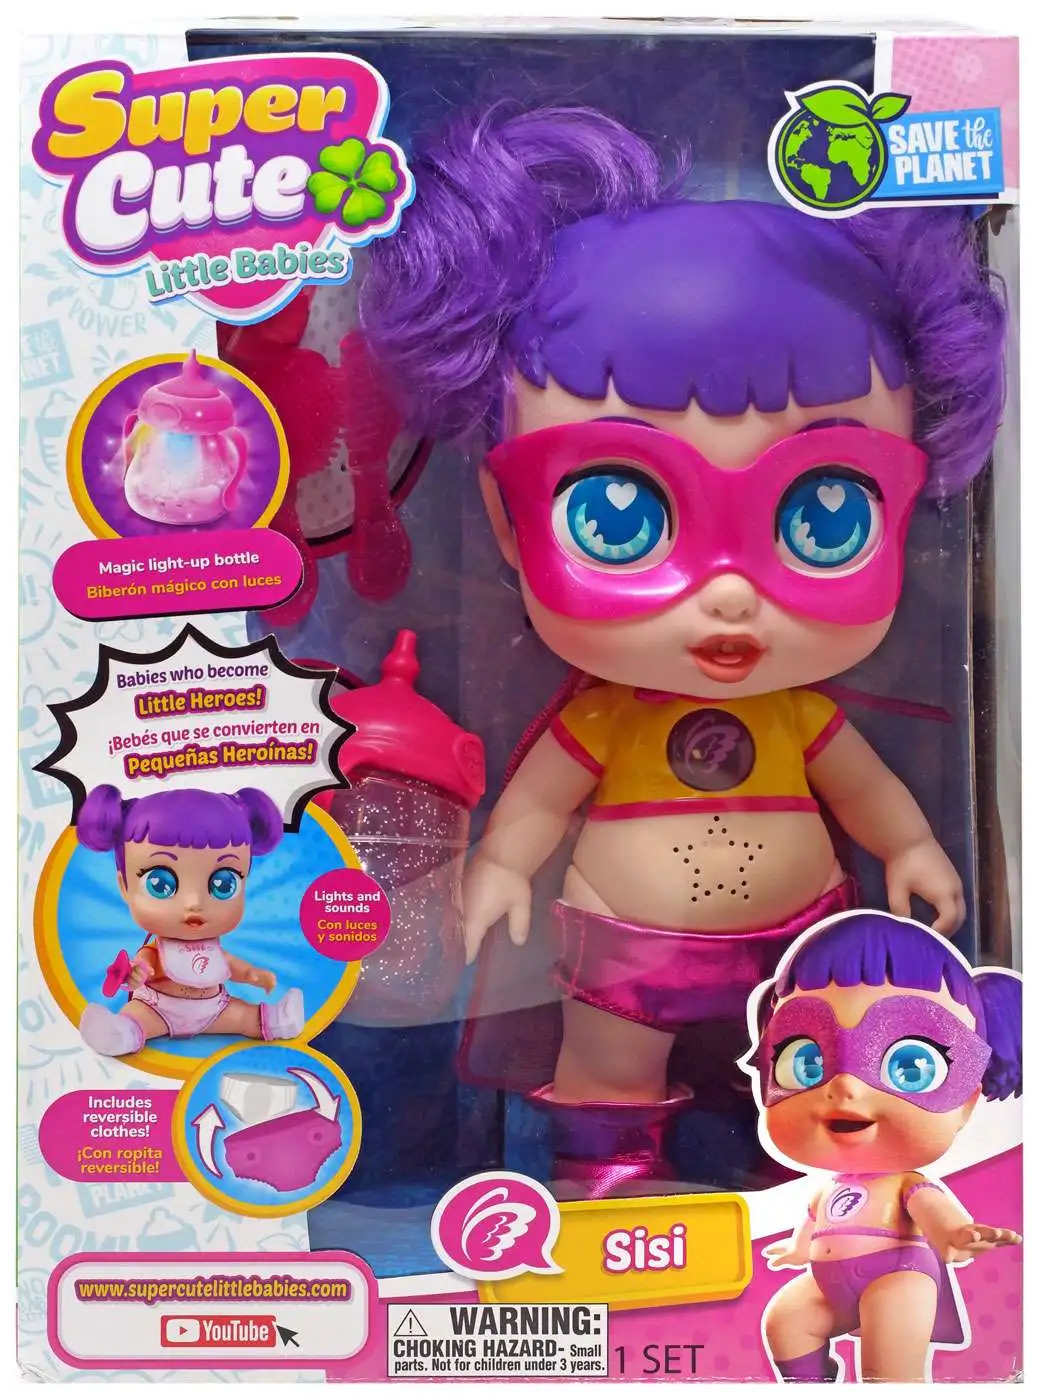 Super Cute Little Babies Sisi Doll Jay at Play - ToyWiz